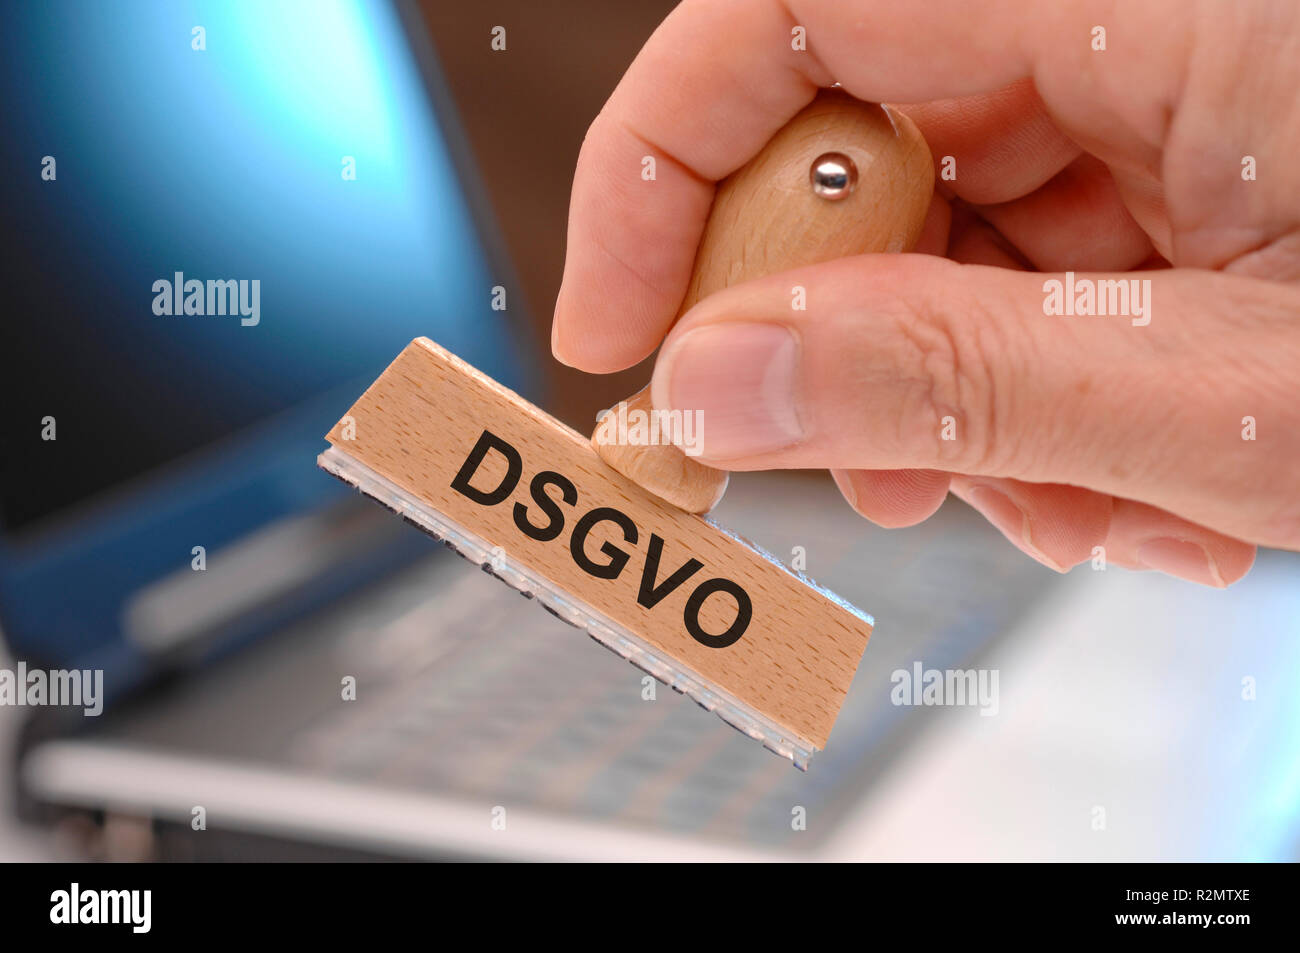 DSGVO printed on wood stamp Stock Photo